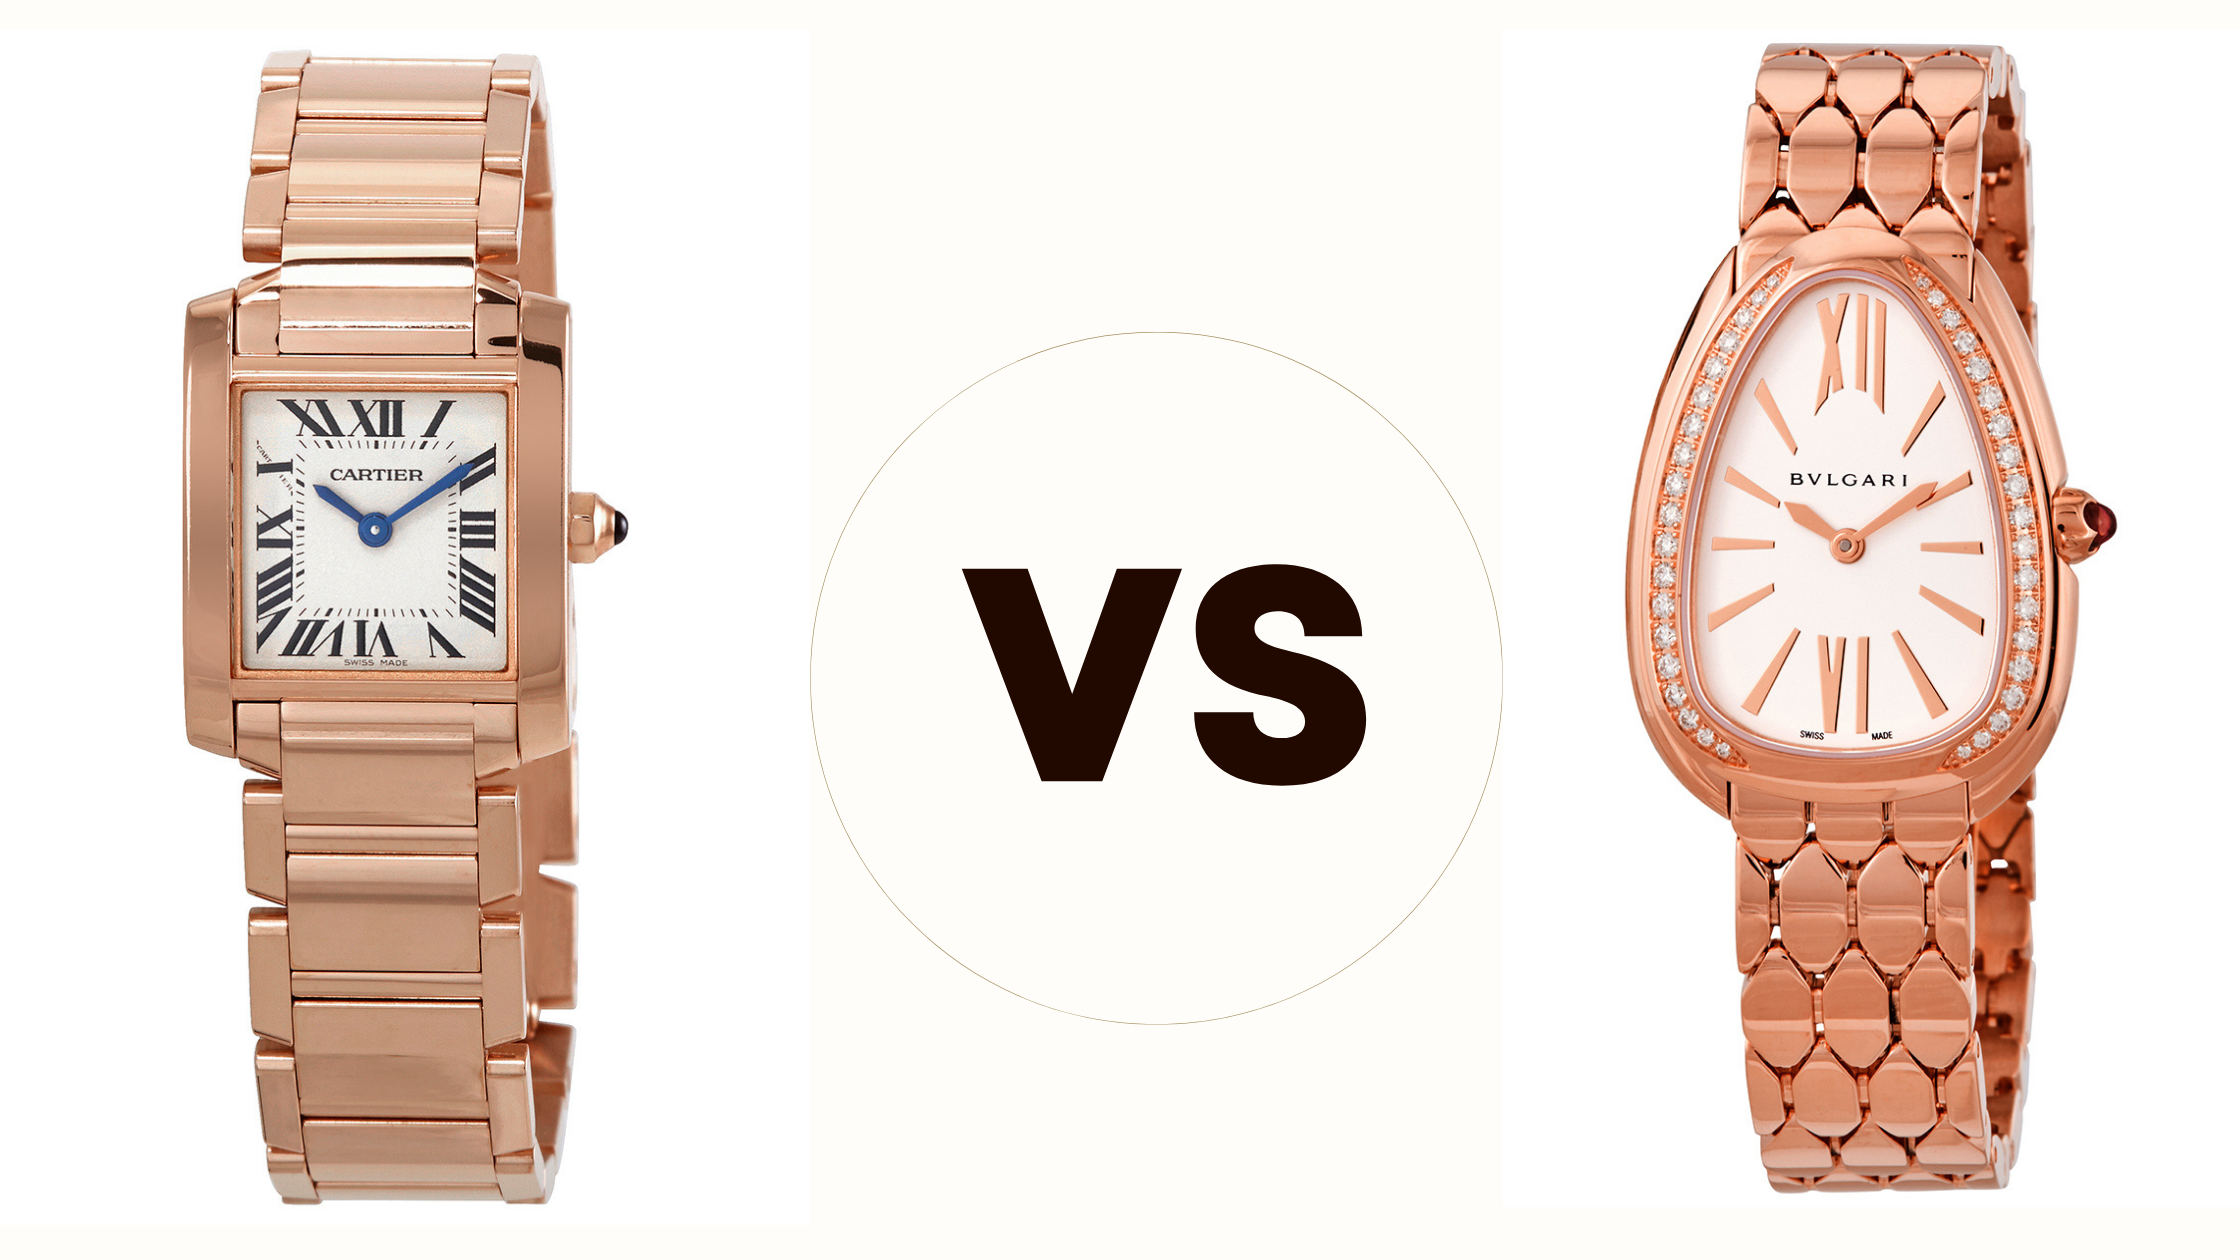 Cartier VS Bvlgari: Which is Better?